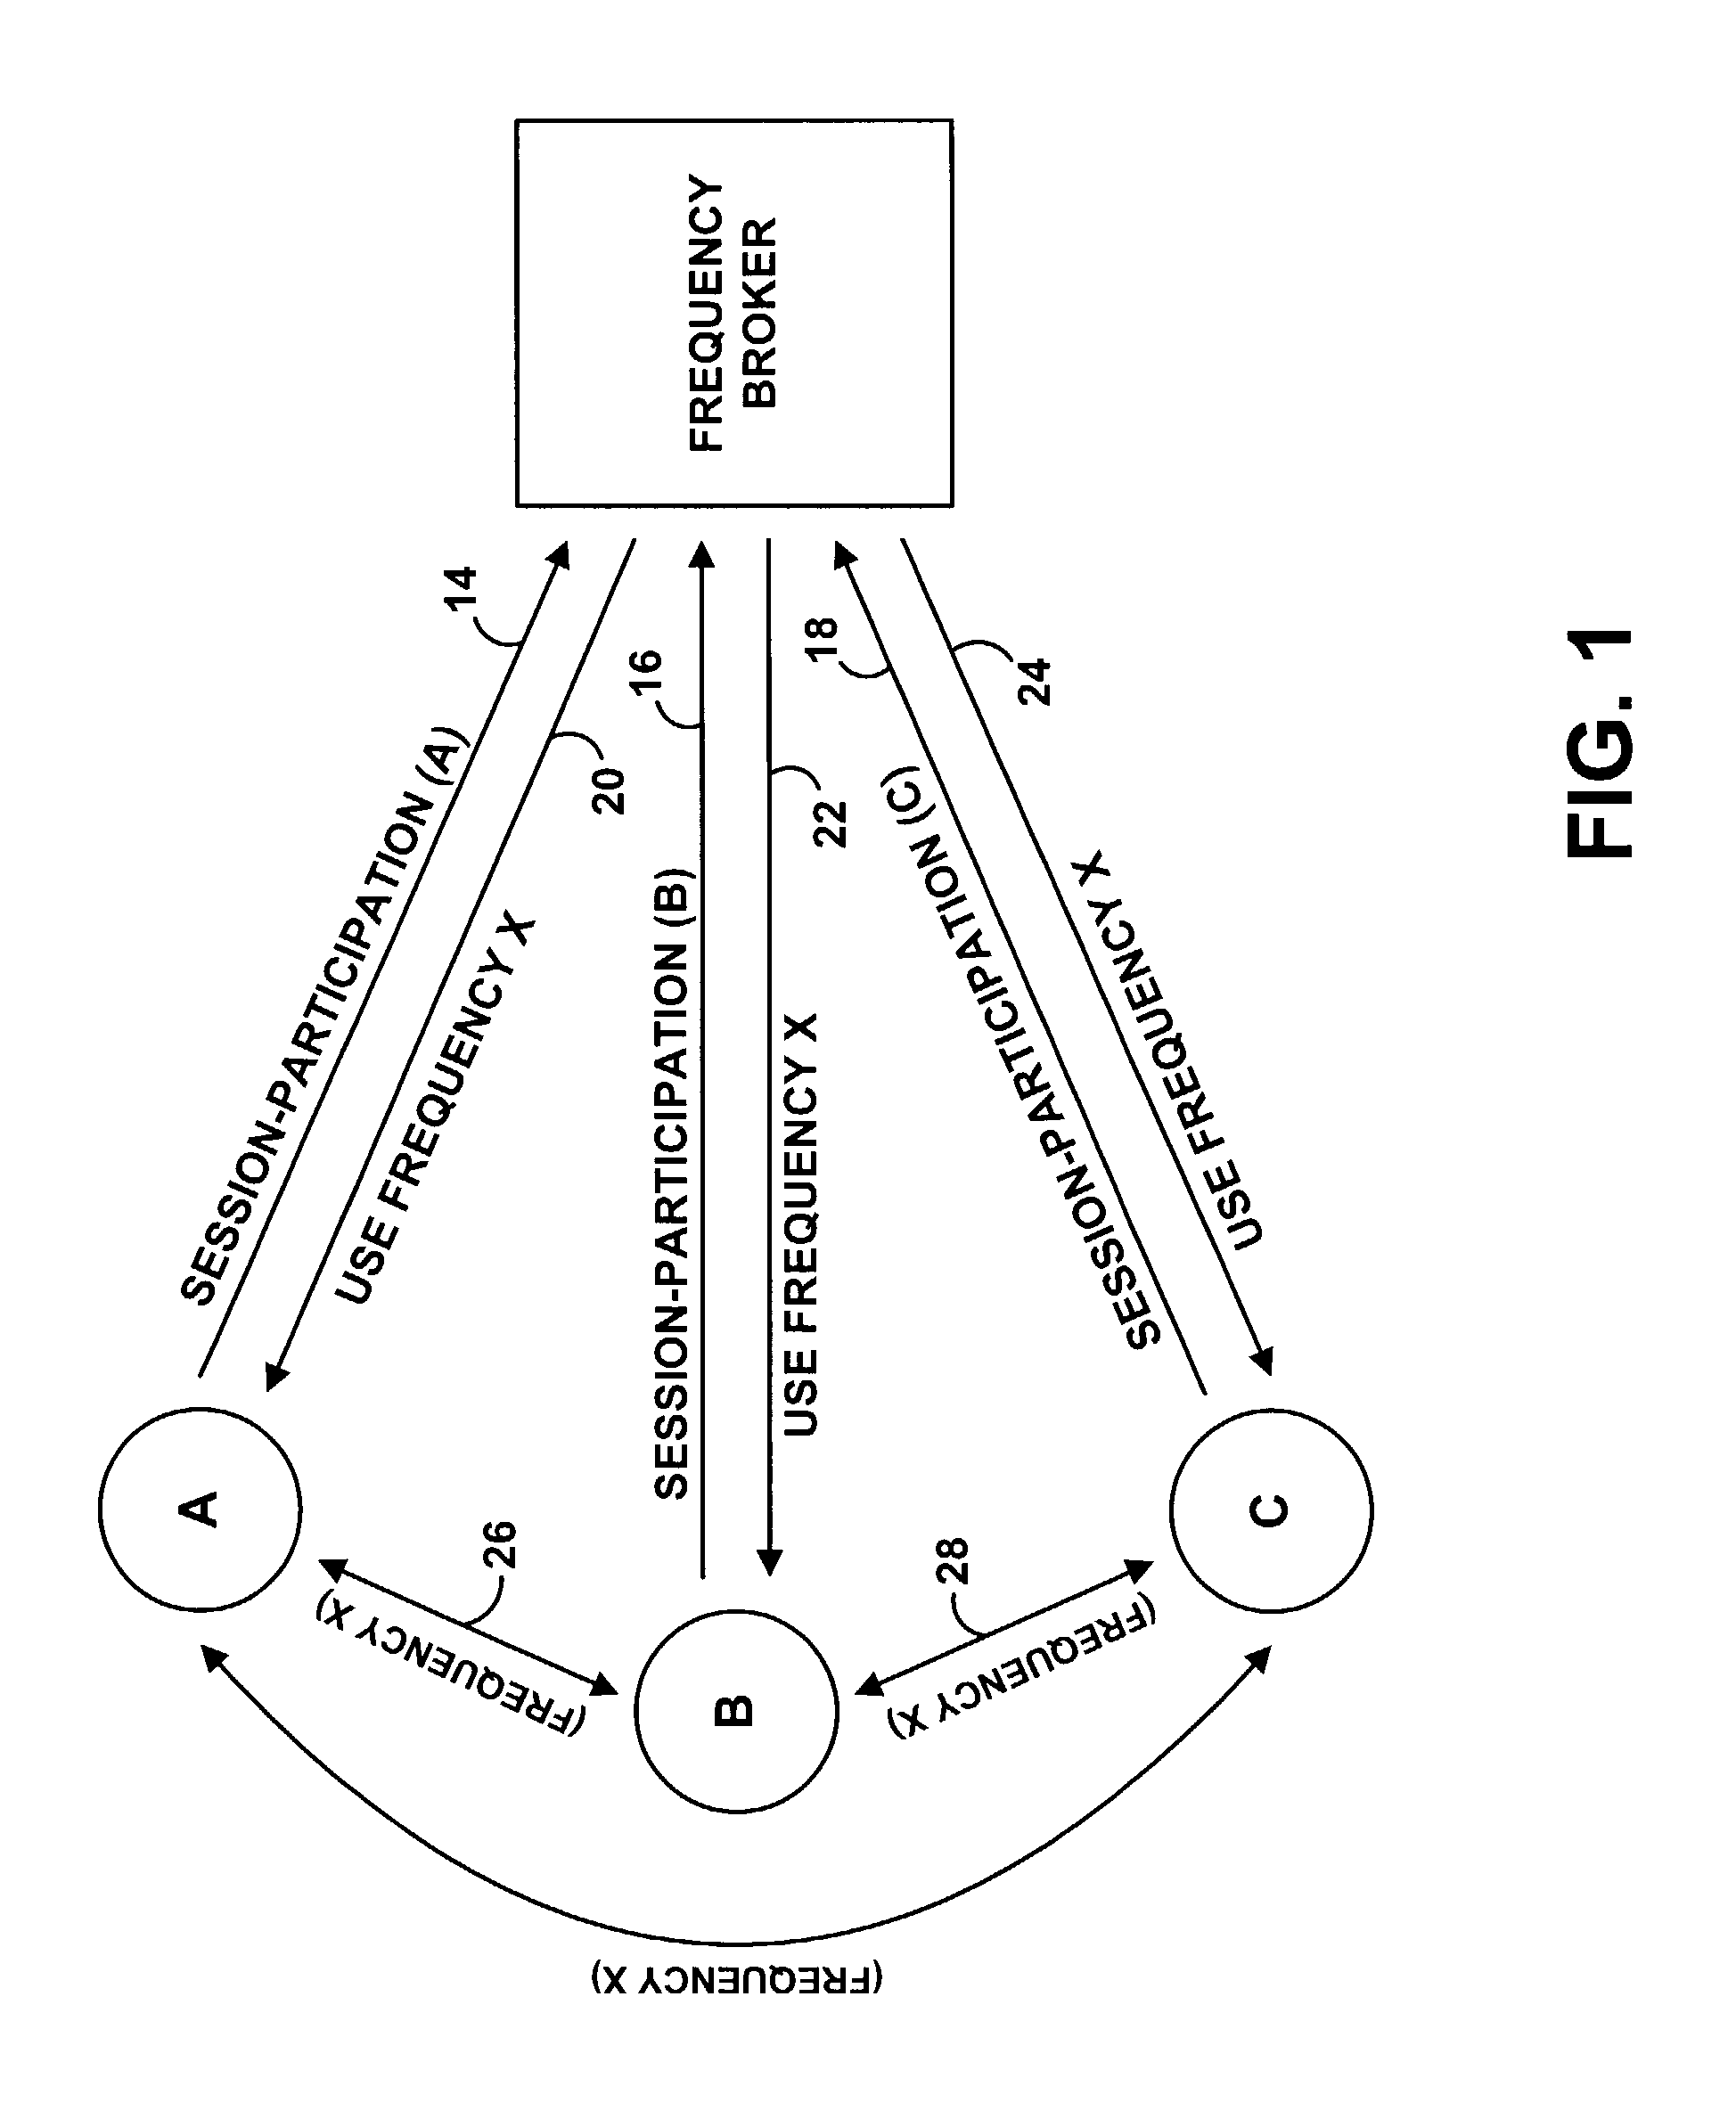 Method and system for brokering frequencies to facilitate peer-to-peer communication